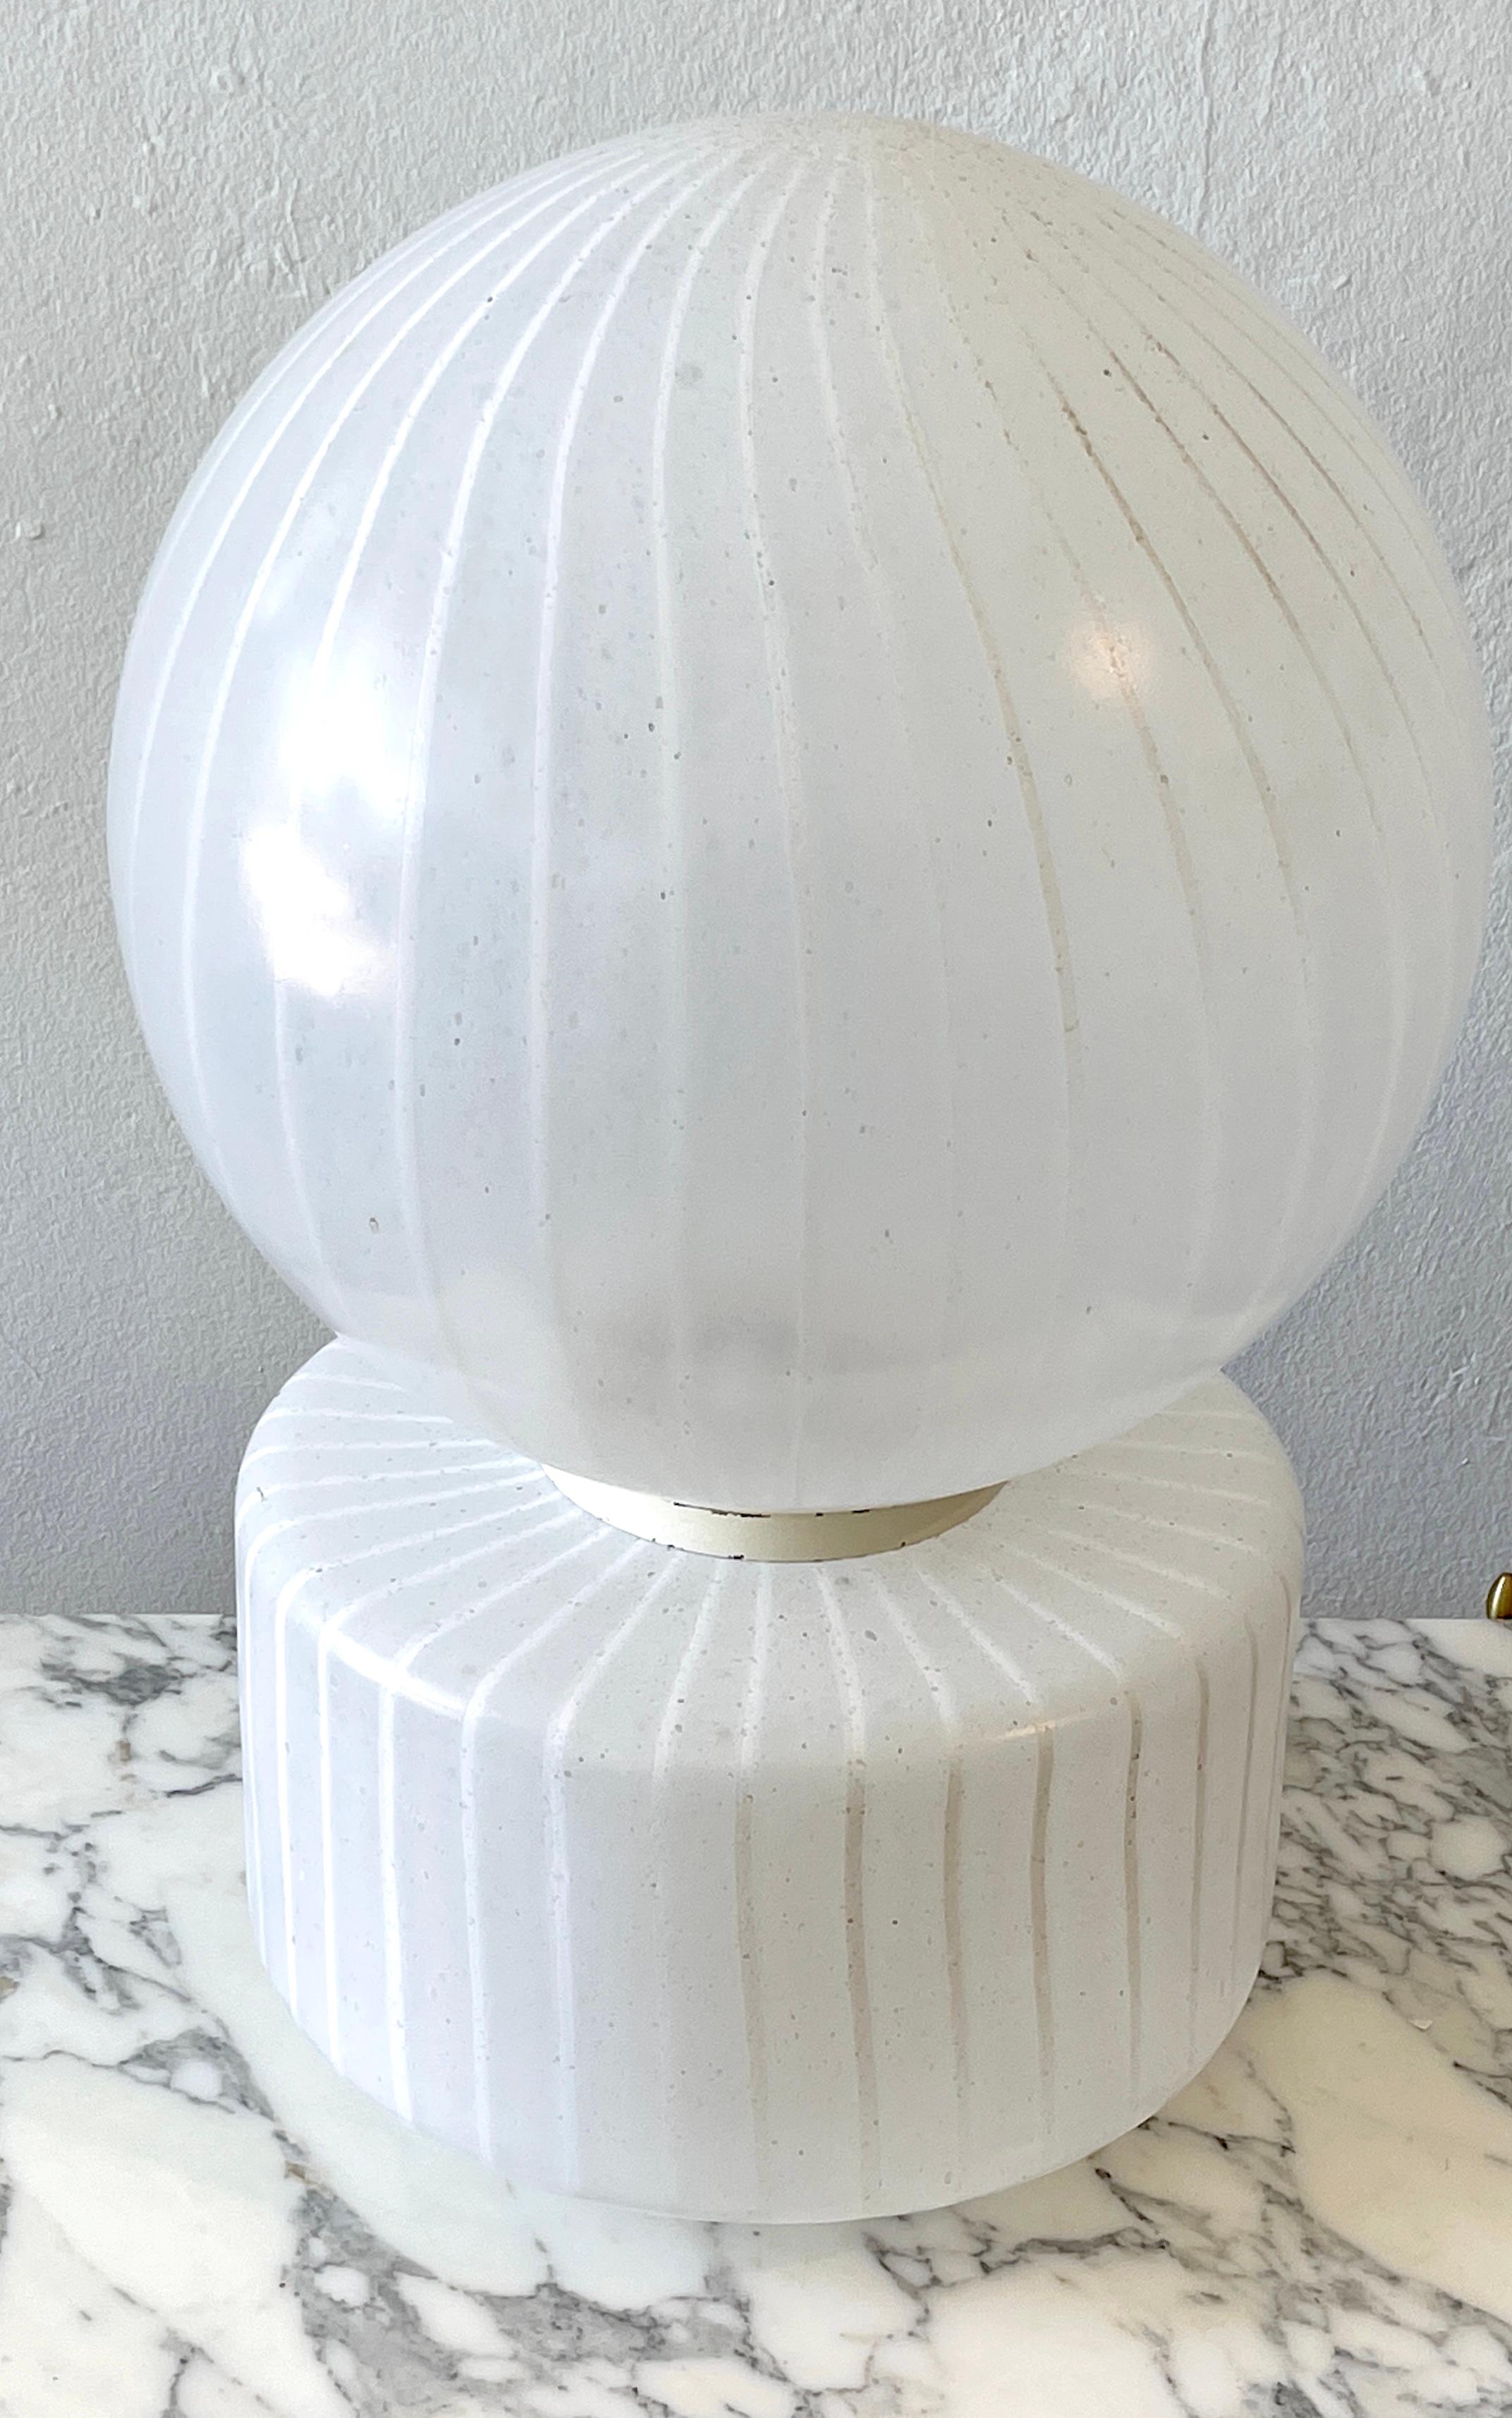 Monumental sculptural 2-piece white striped murano- vistosi glass table lamp.
Italy, Circa 1950s

A large and early masterwork, in two parts with the hand blown 15-Inch diameter round shade with white opaque back-ground with continuous internal